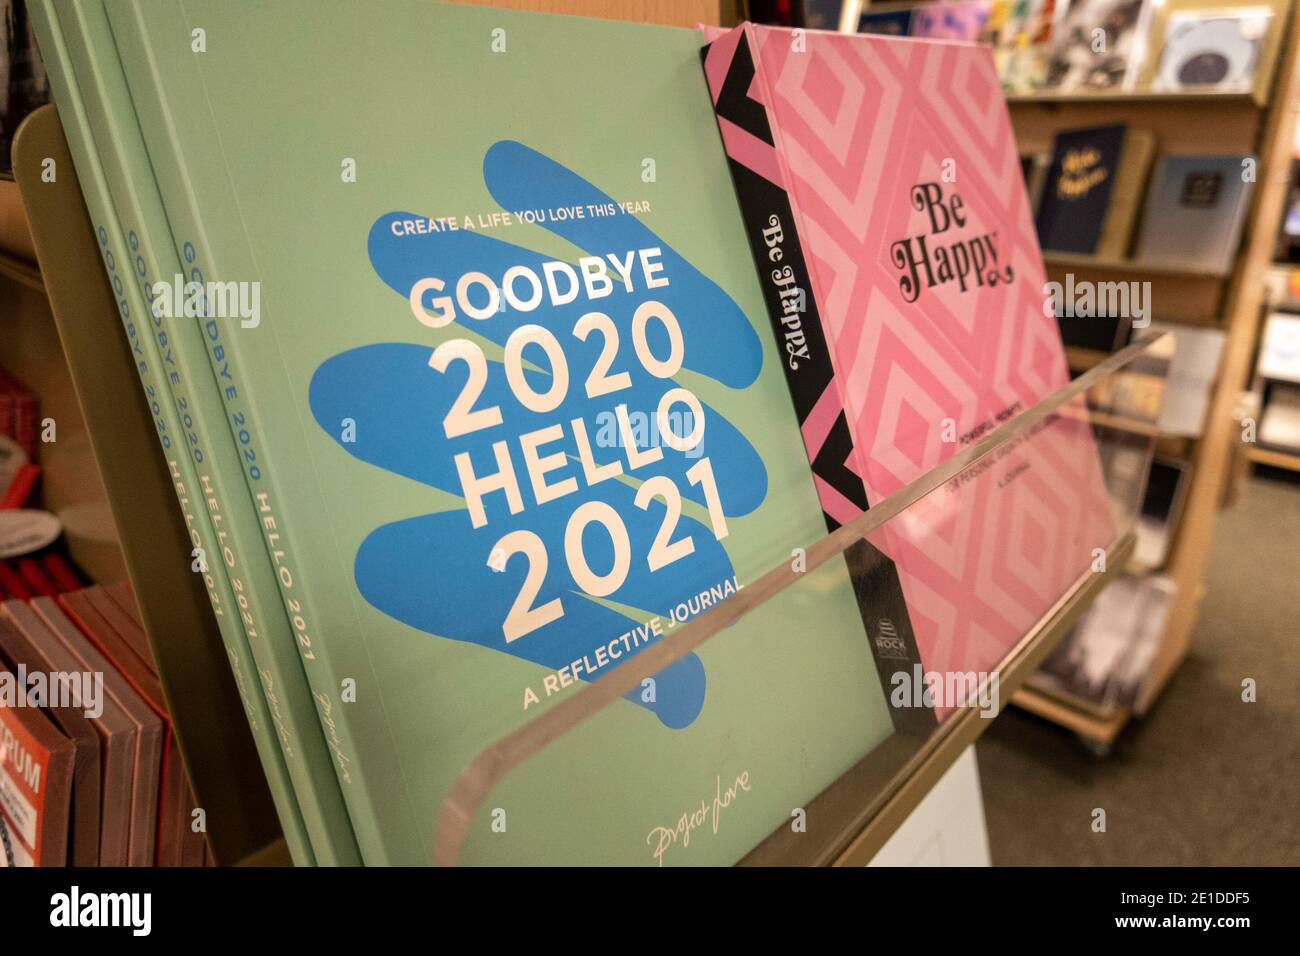 Barnes & Noble Booksellers on Fifth Avenue Display, NYC, USA Stock Photo